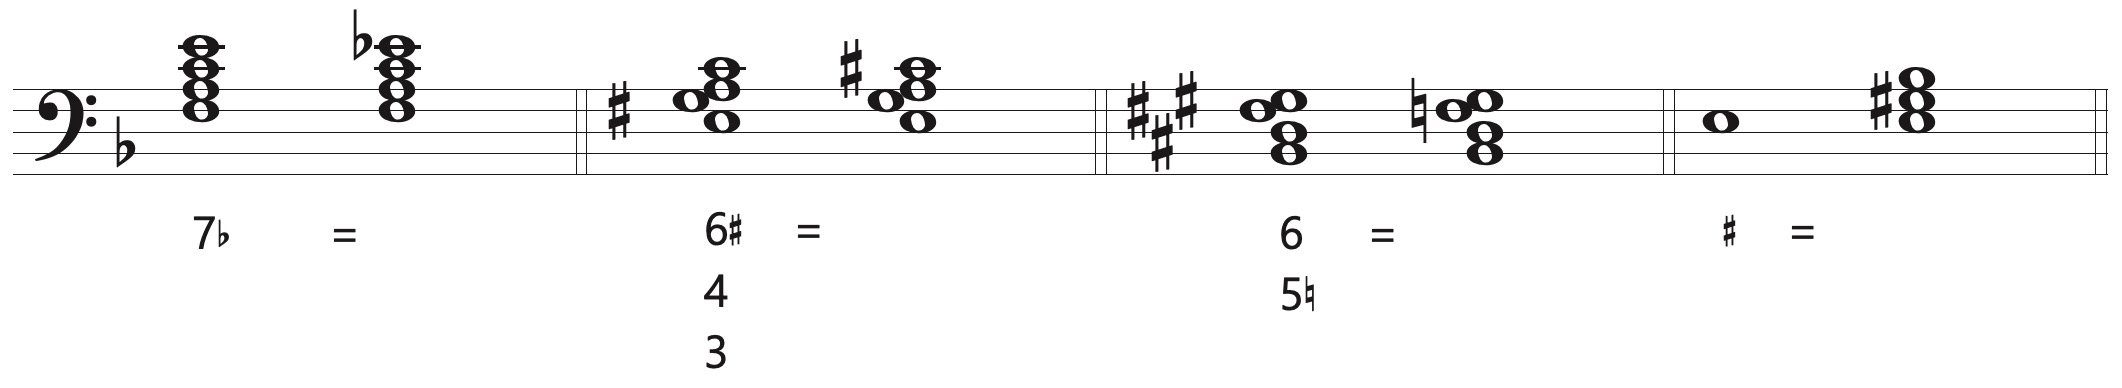 bass position symbols examples